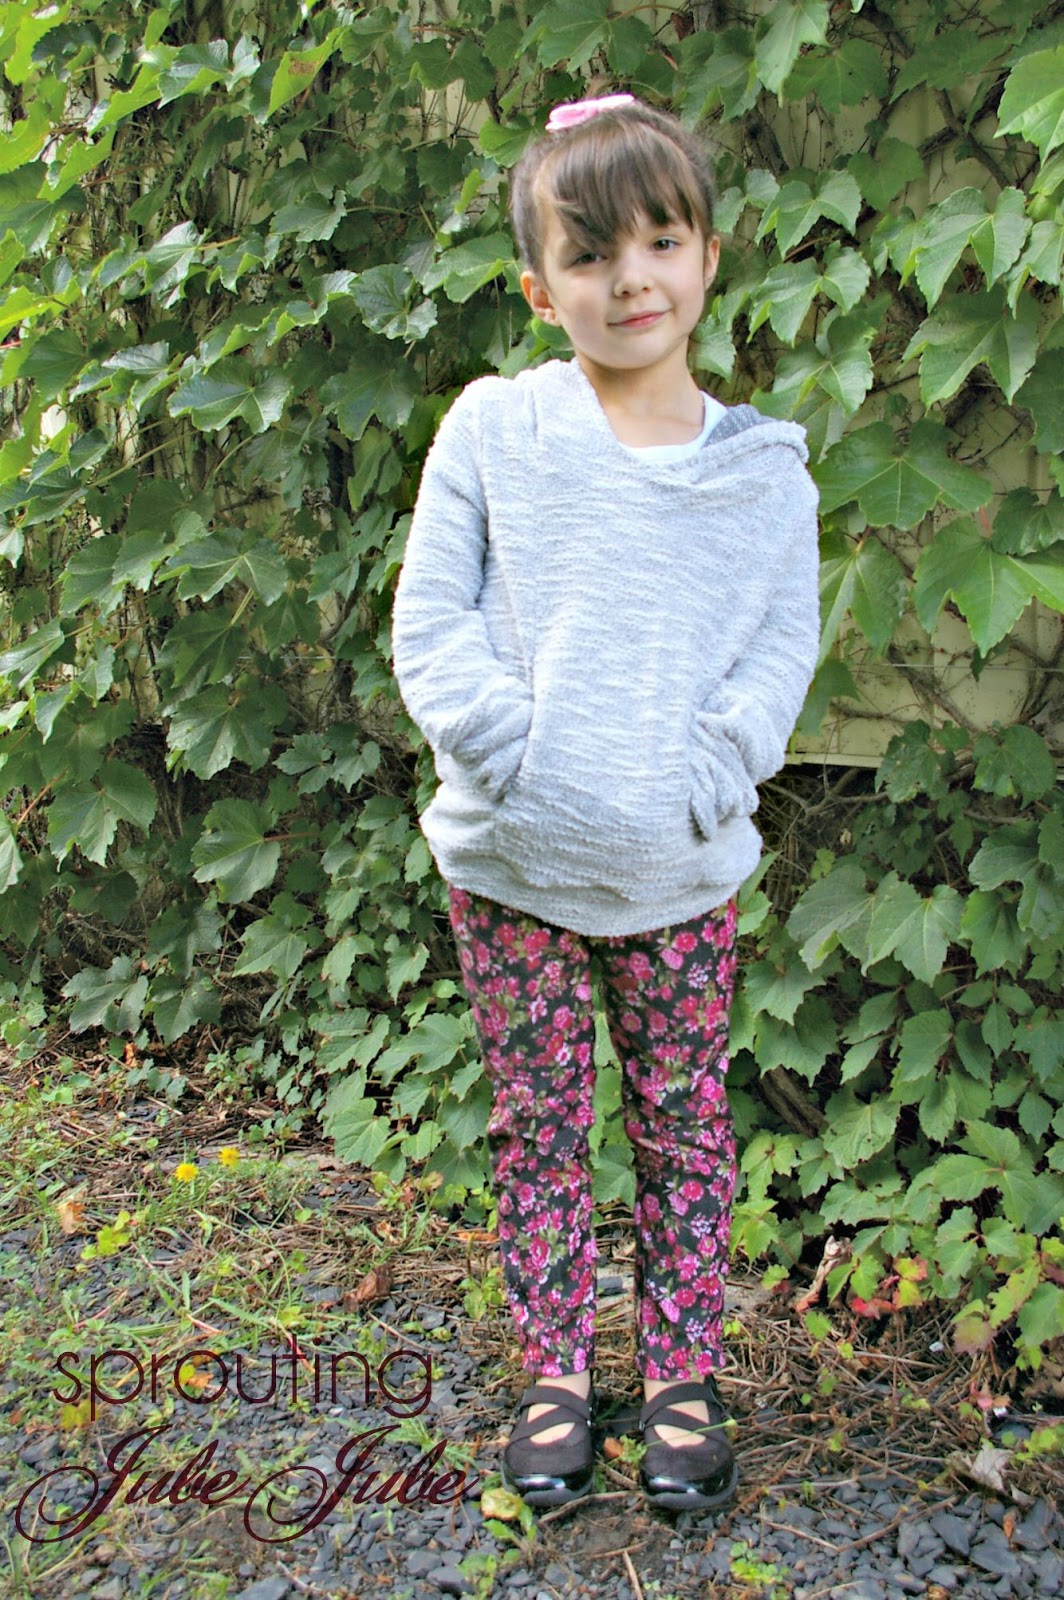 Sprouting JubeJube: Sew 'n Style with Lil Luxe Collection